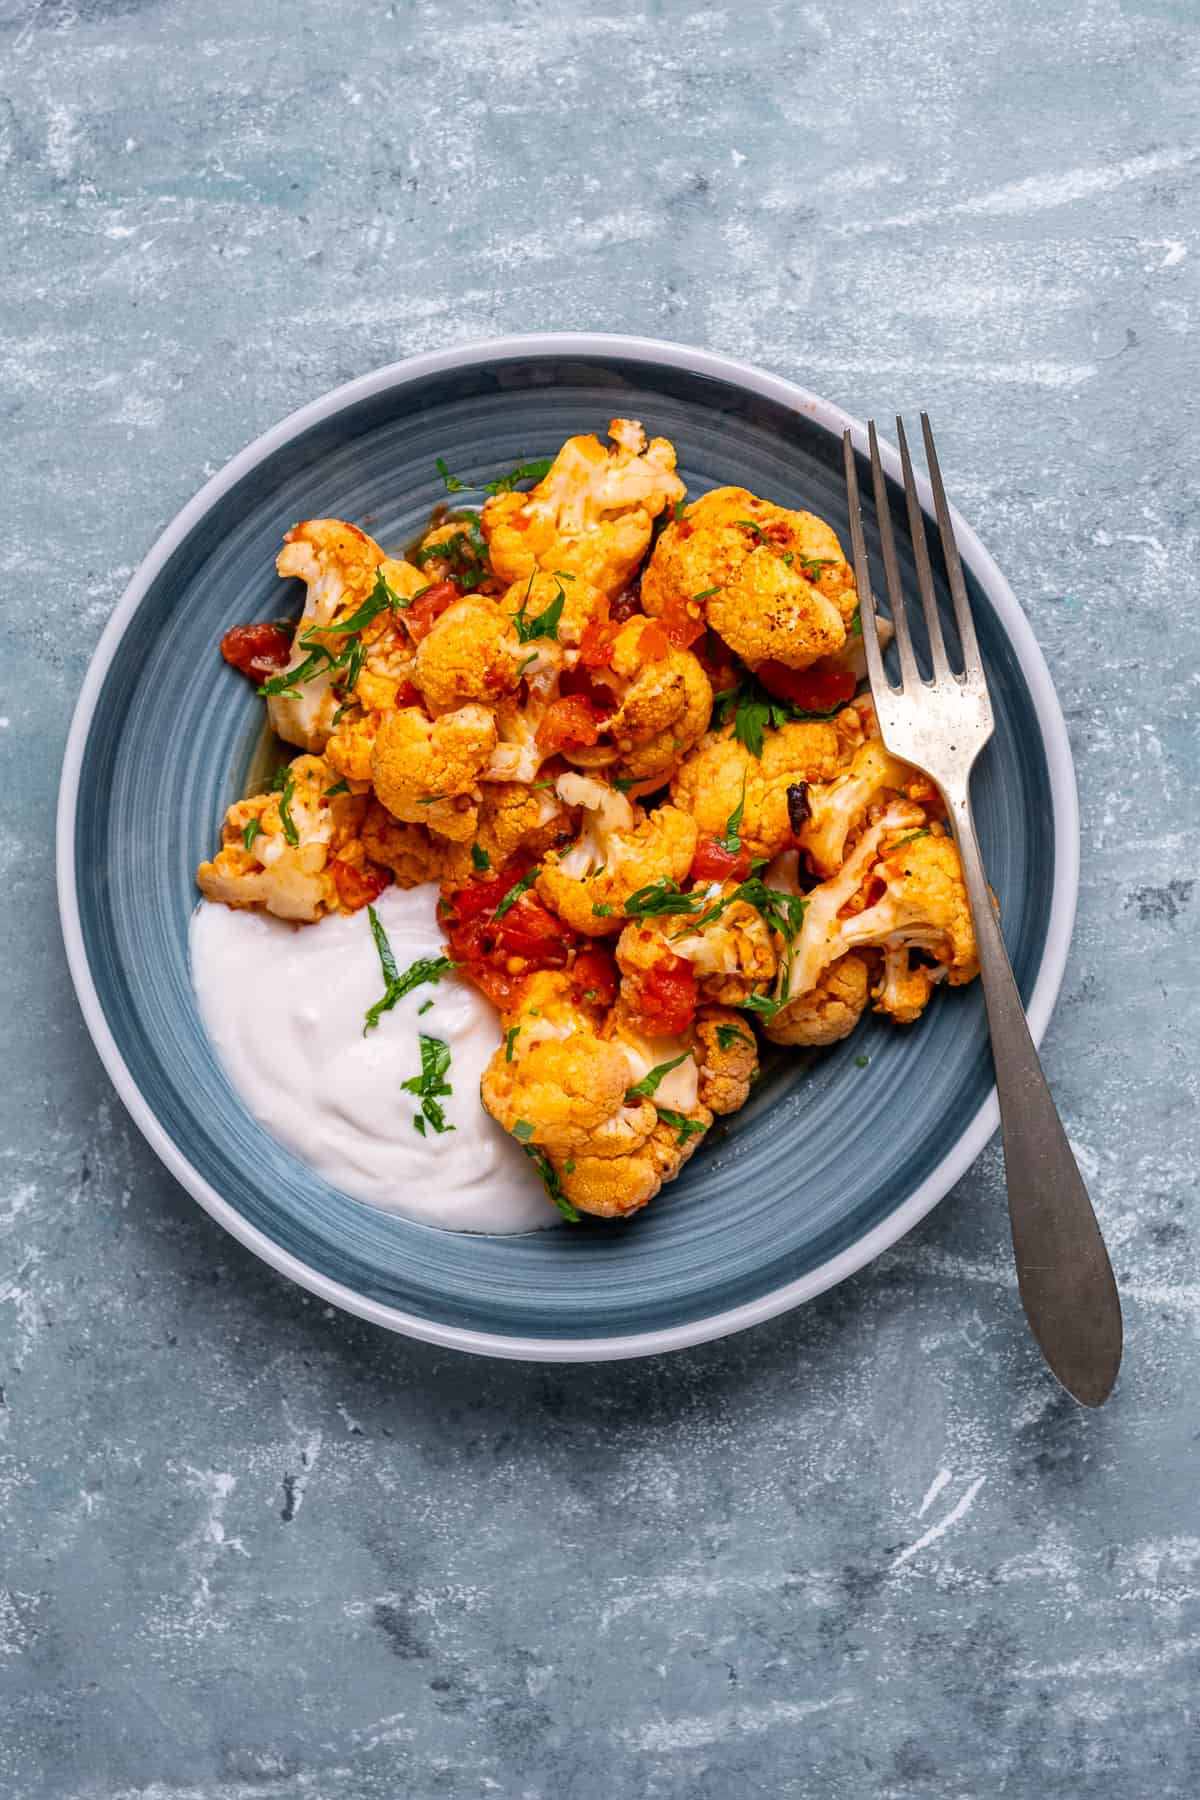 Baked cauliflower dish served on a bluish plate, yogurt sauce and a fork on the side.